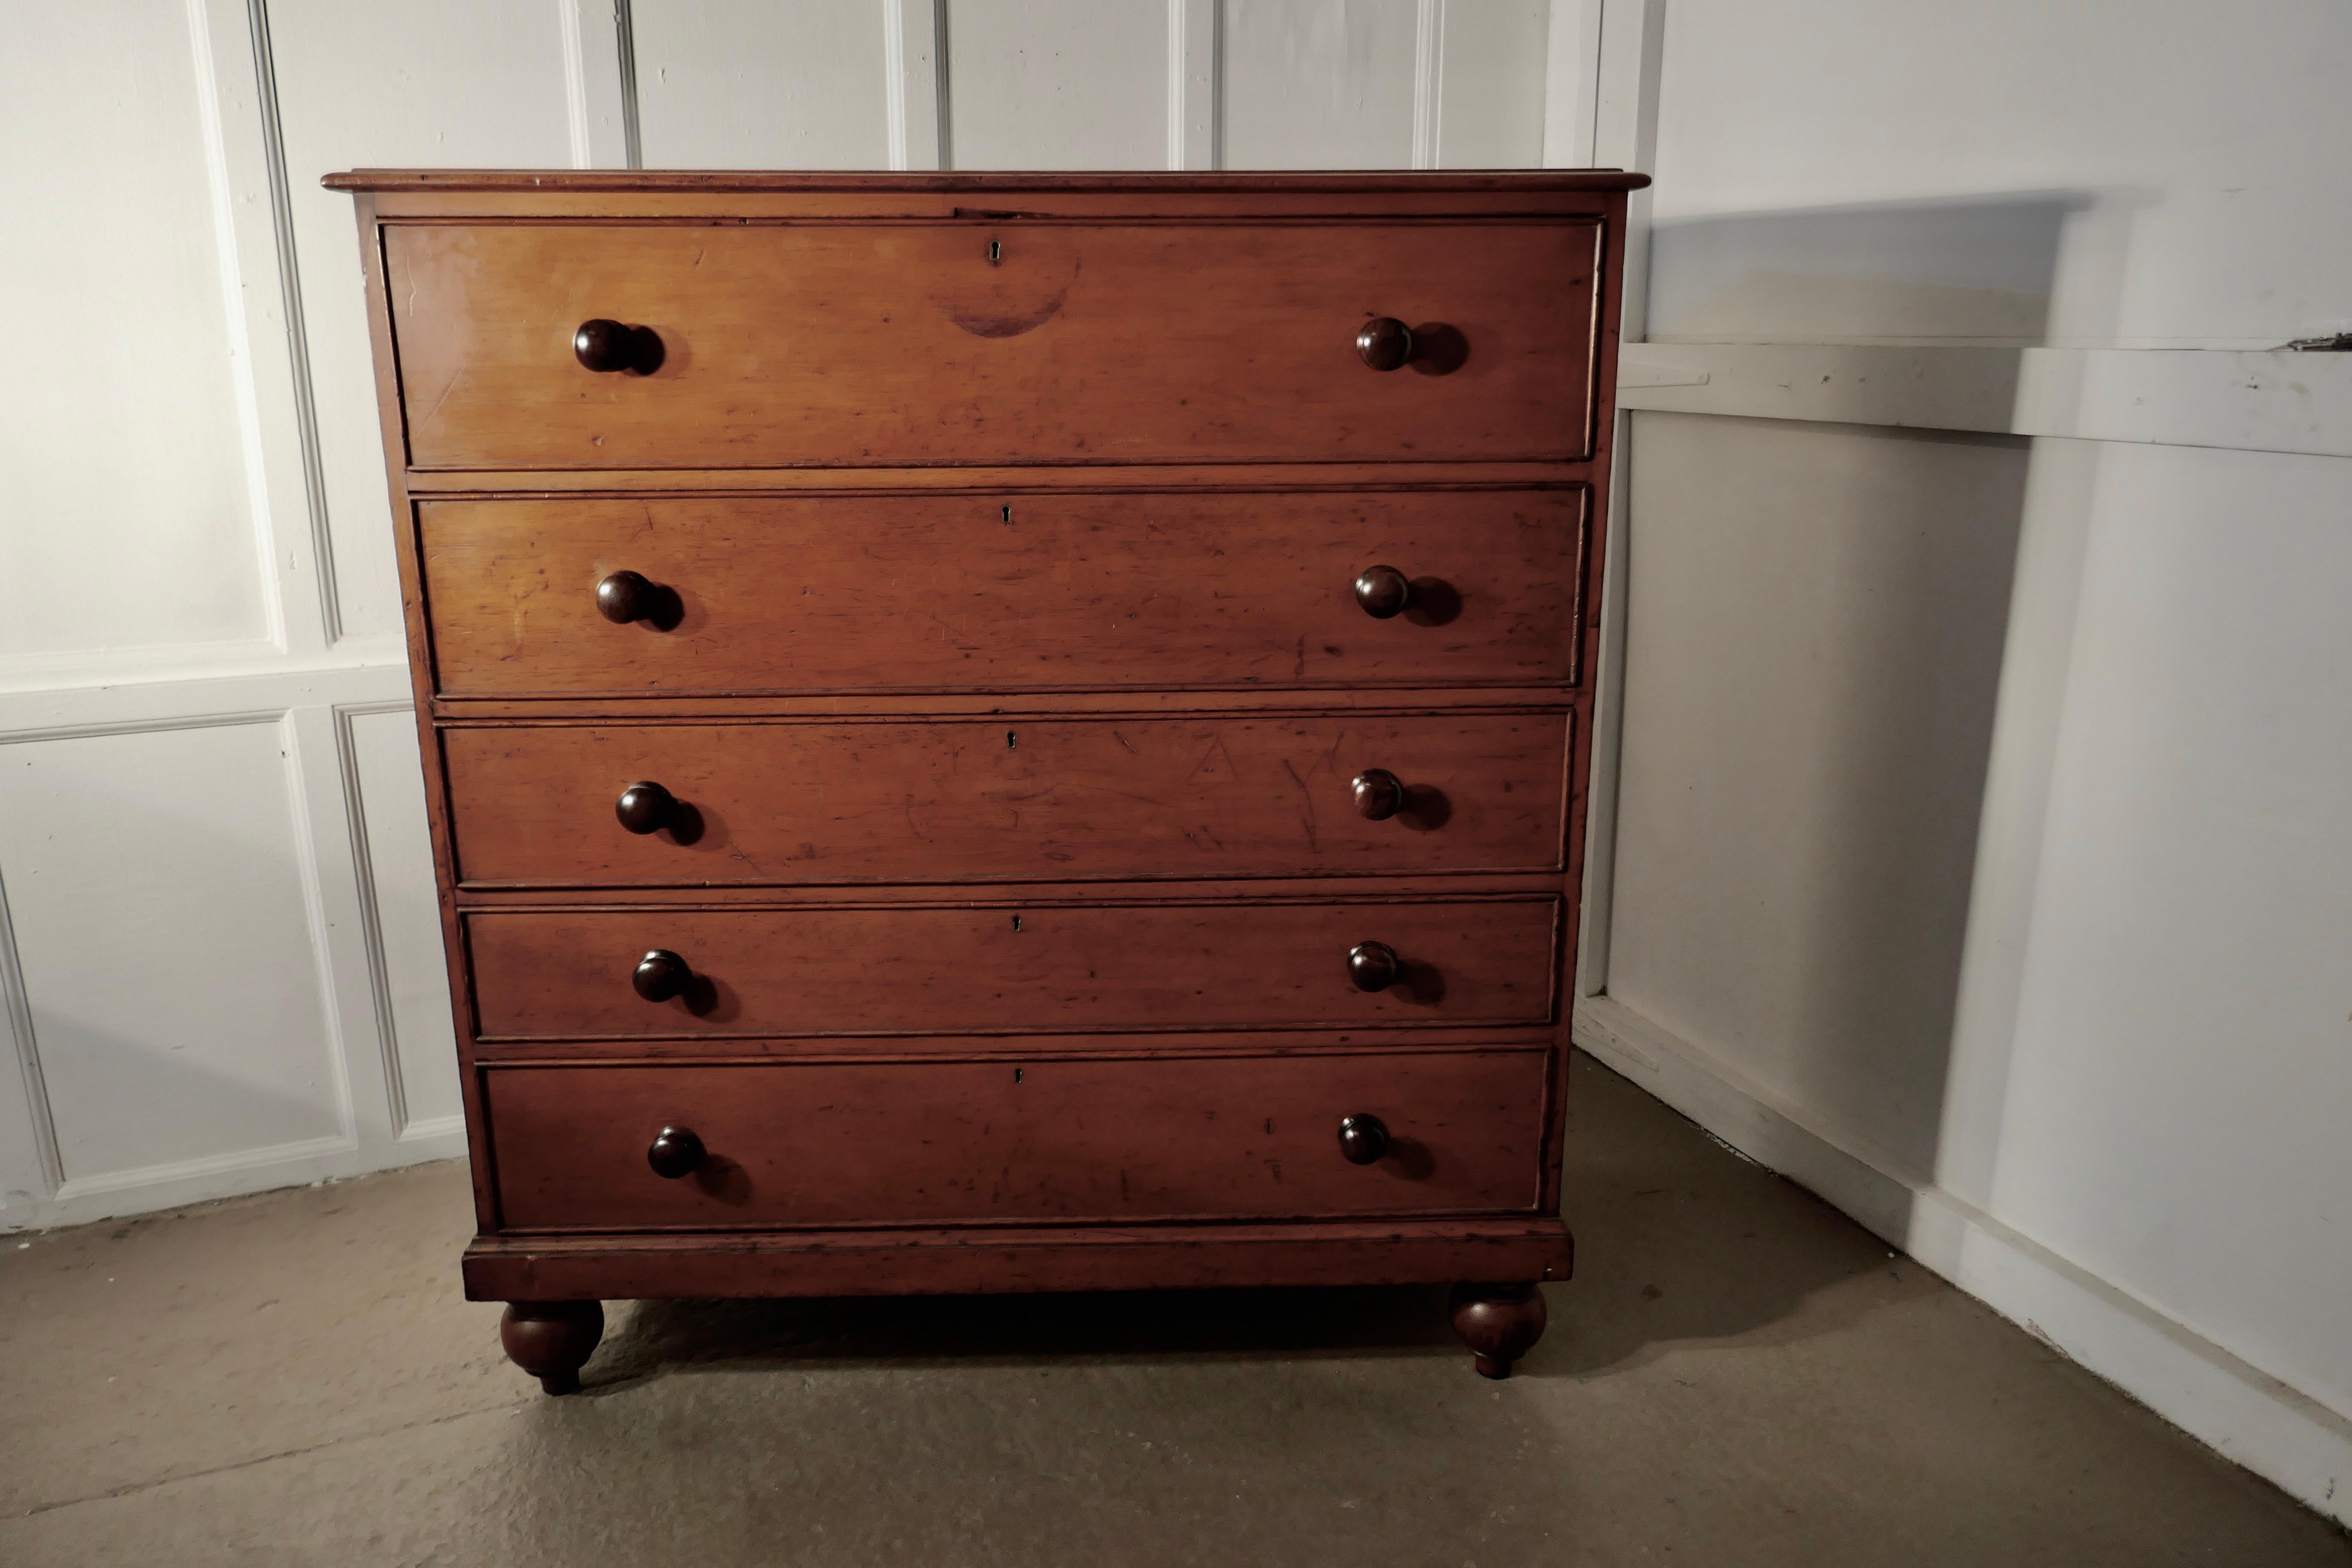 Very large Victorian pine chest of drawers, 5-drawer chest

This is a very unusual and large pine chest of drawers, it comes in its original age darkened finish, it has not been stripped and it has a very unusual drawer combination

The pine